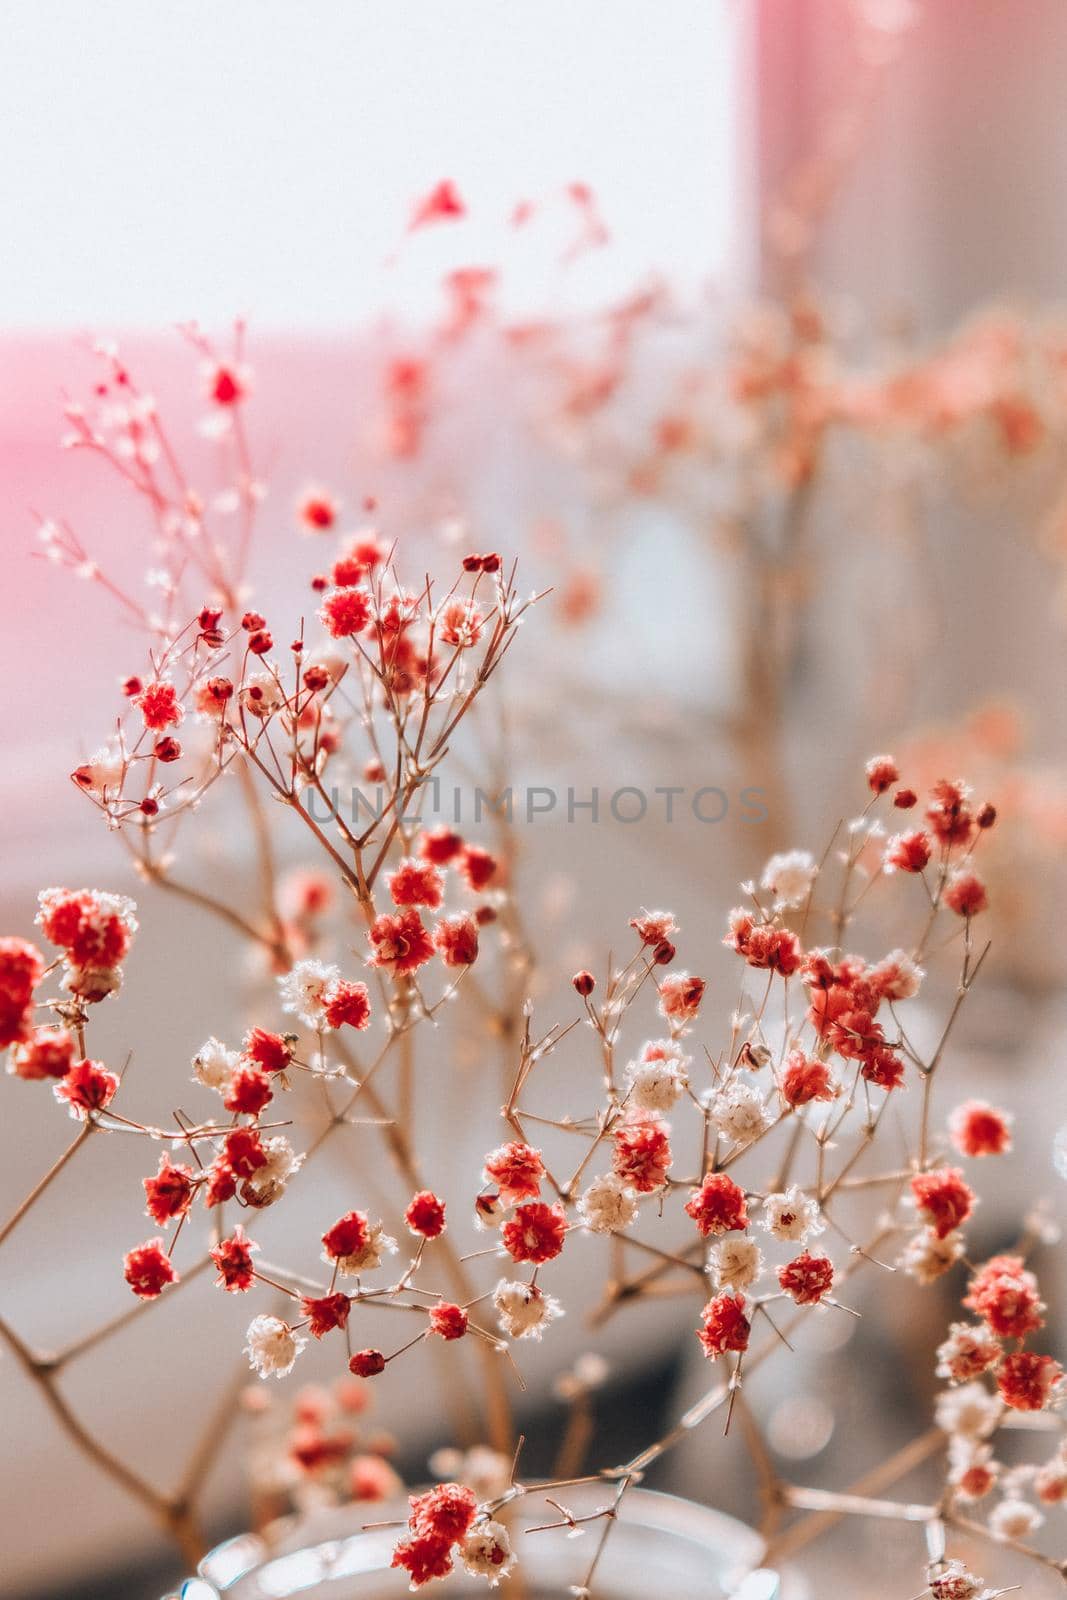 Gypsophila or baby's breath flowers Beautiful pink flower blooming with soft light. Selective focus. Spring holiday card background. Delicate aesthetics. Bloom nature backdrop.